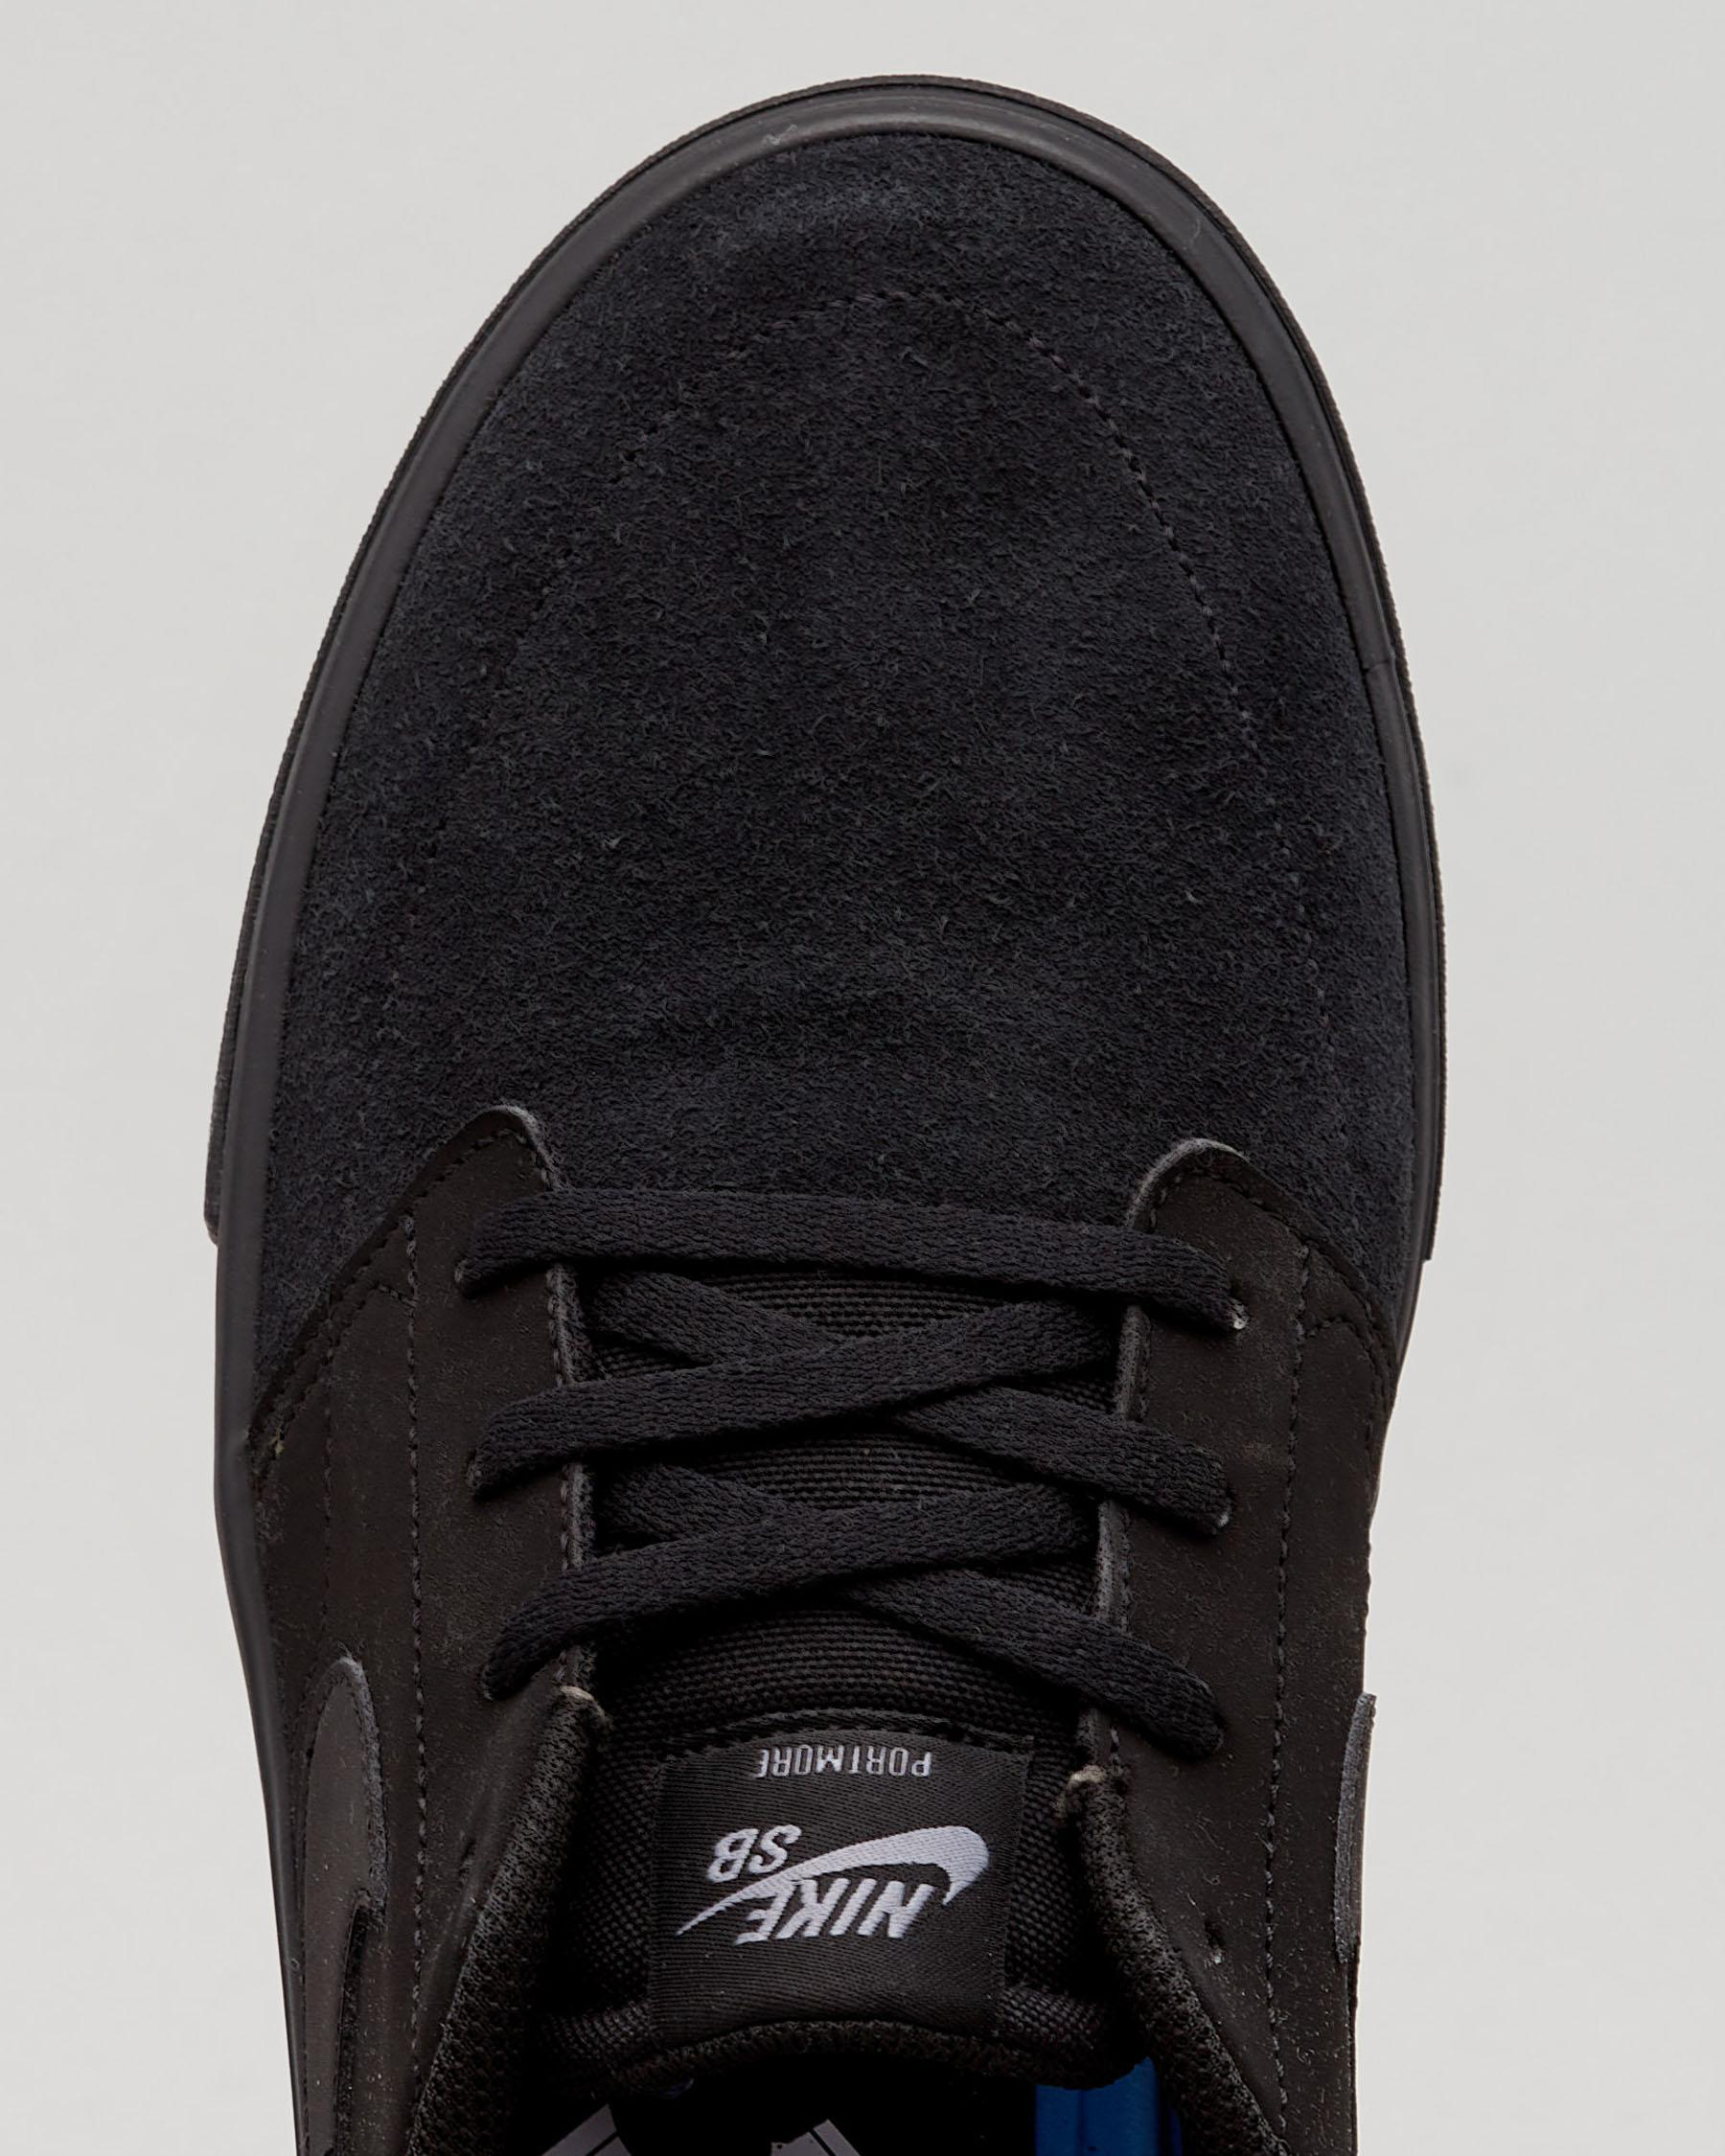 Nike Portmore Shoes In Black/black - Fast Shipping & Easy Returns ...